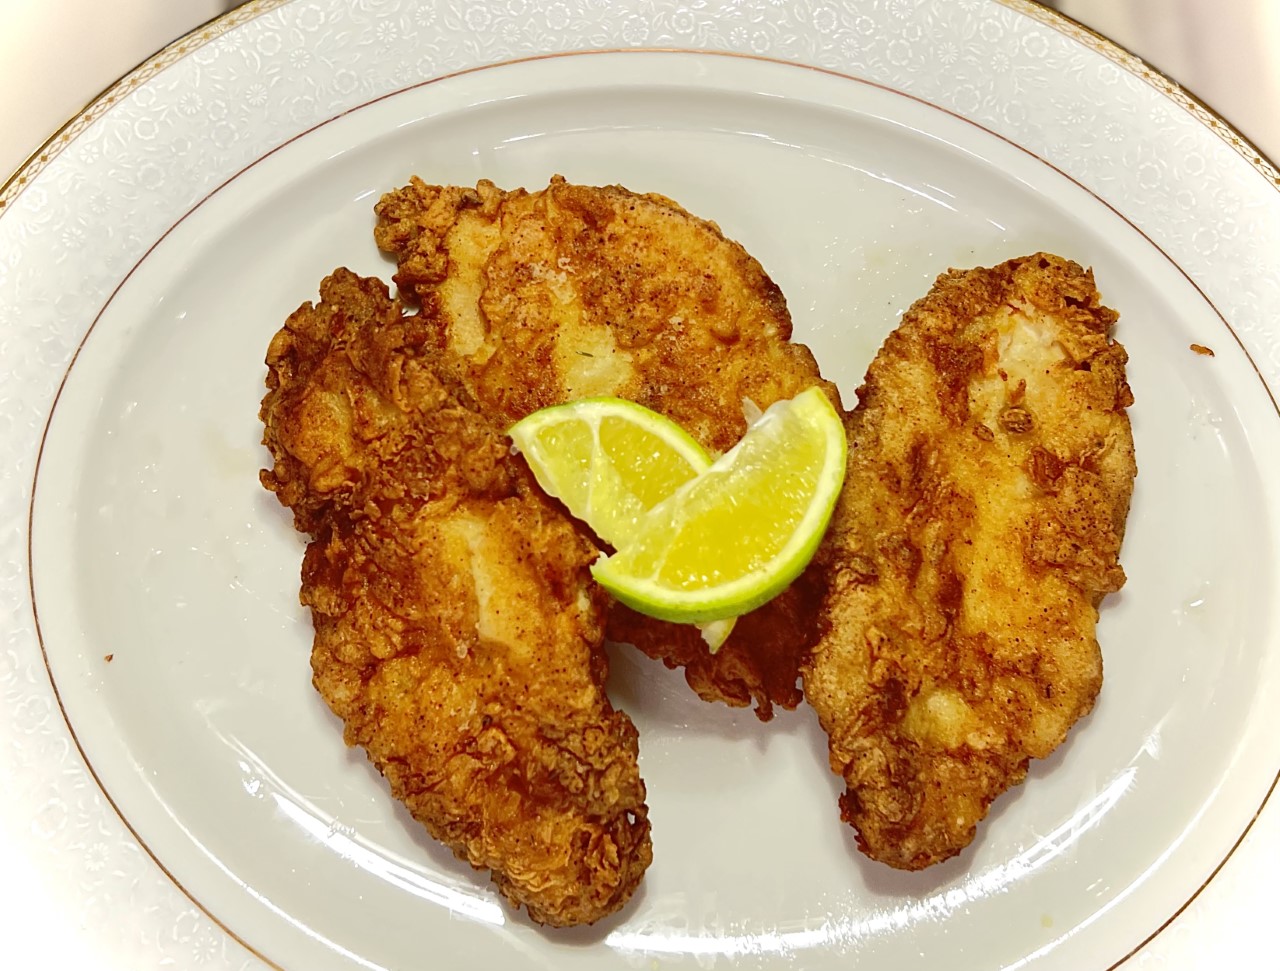 Three schnitzels on the plate. On the bottom there are slices of lemon.